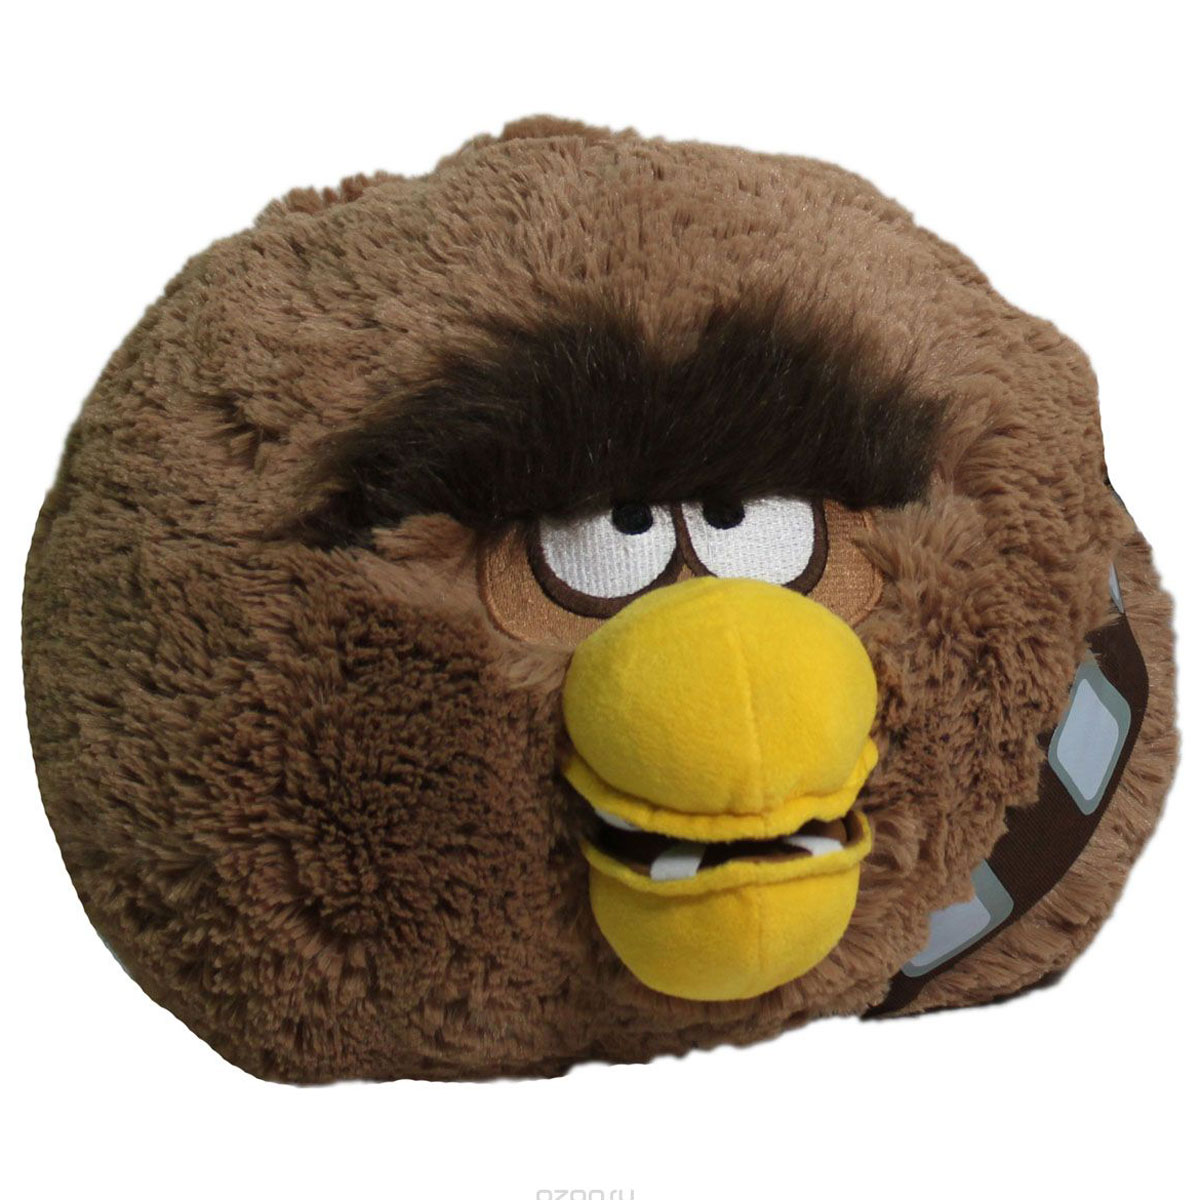 Angry Birds    Star Wars: Chewbacca, 27  - Angry Birds94065  Angry Birds Star Wars       .                Angry Birds.               . Angry Birds Star Wars -     Angry Birds.        